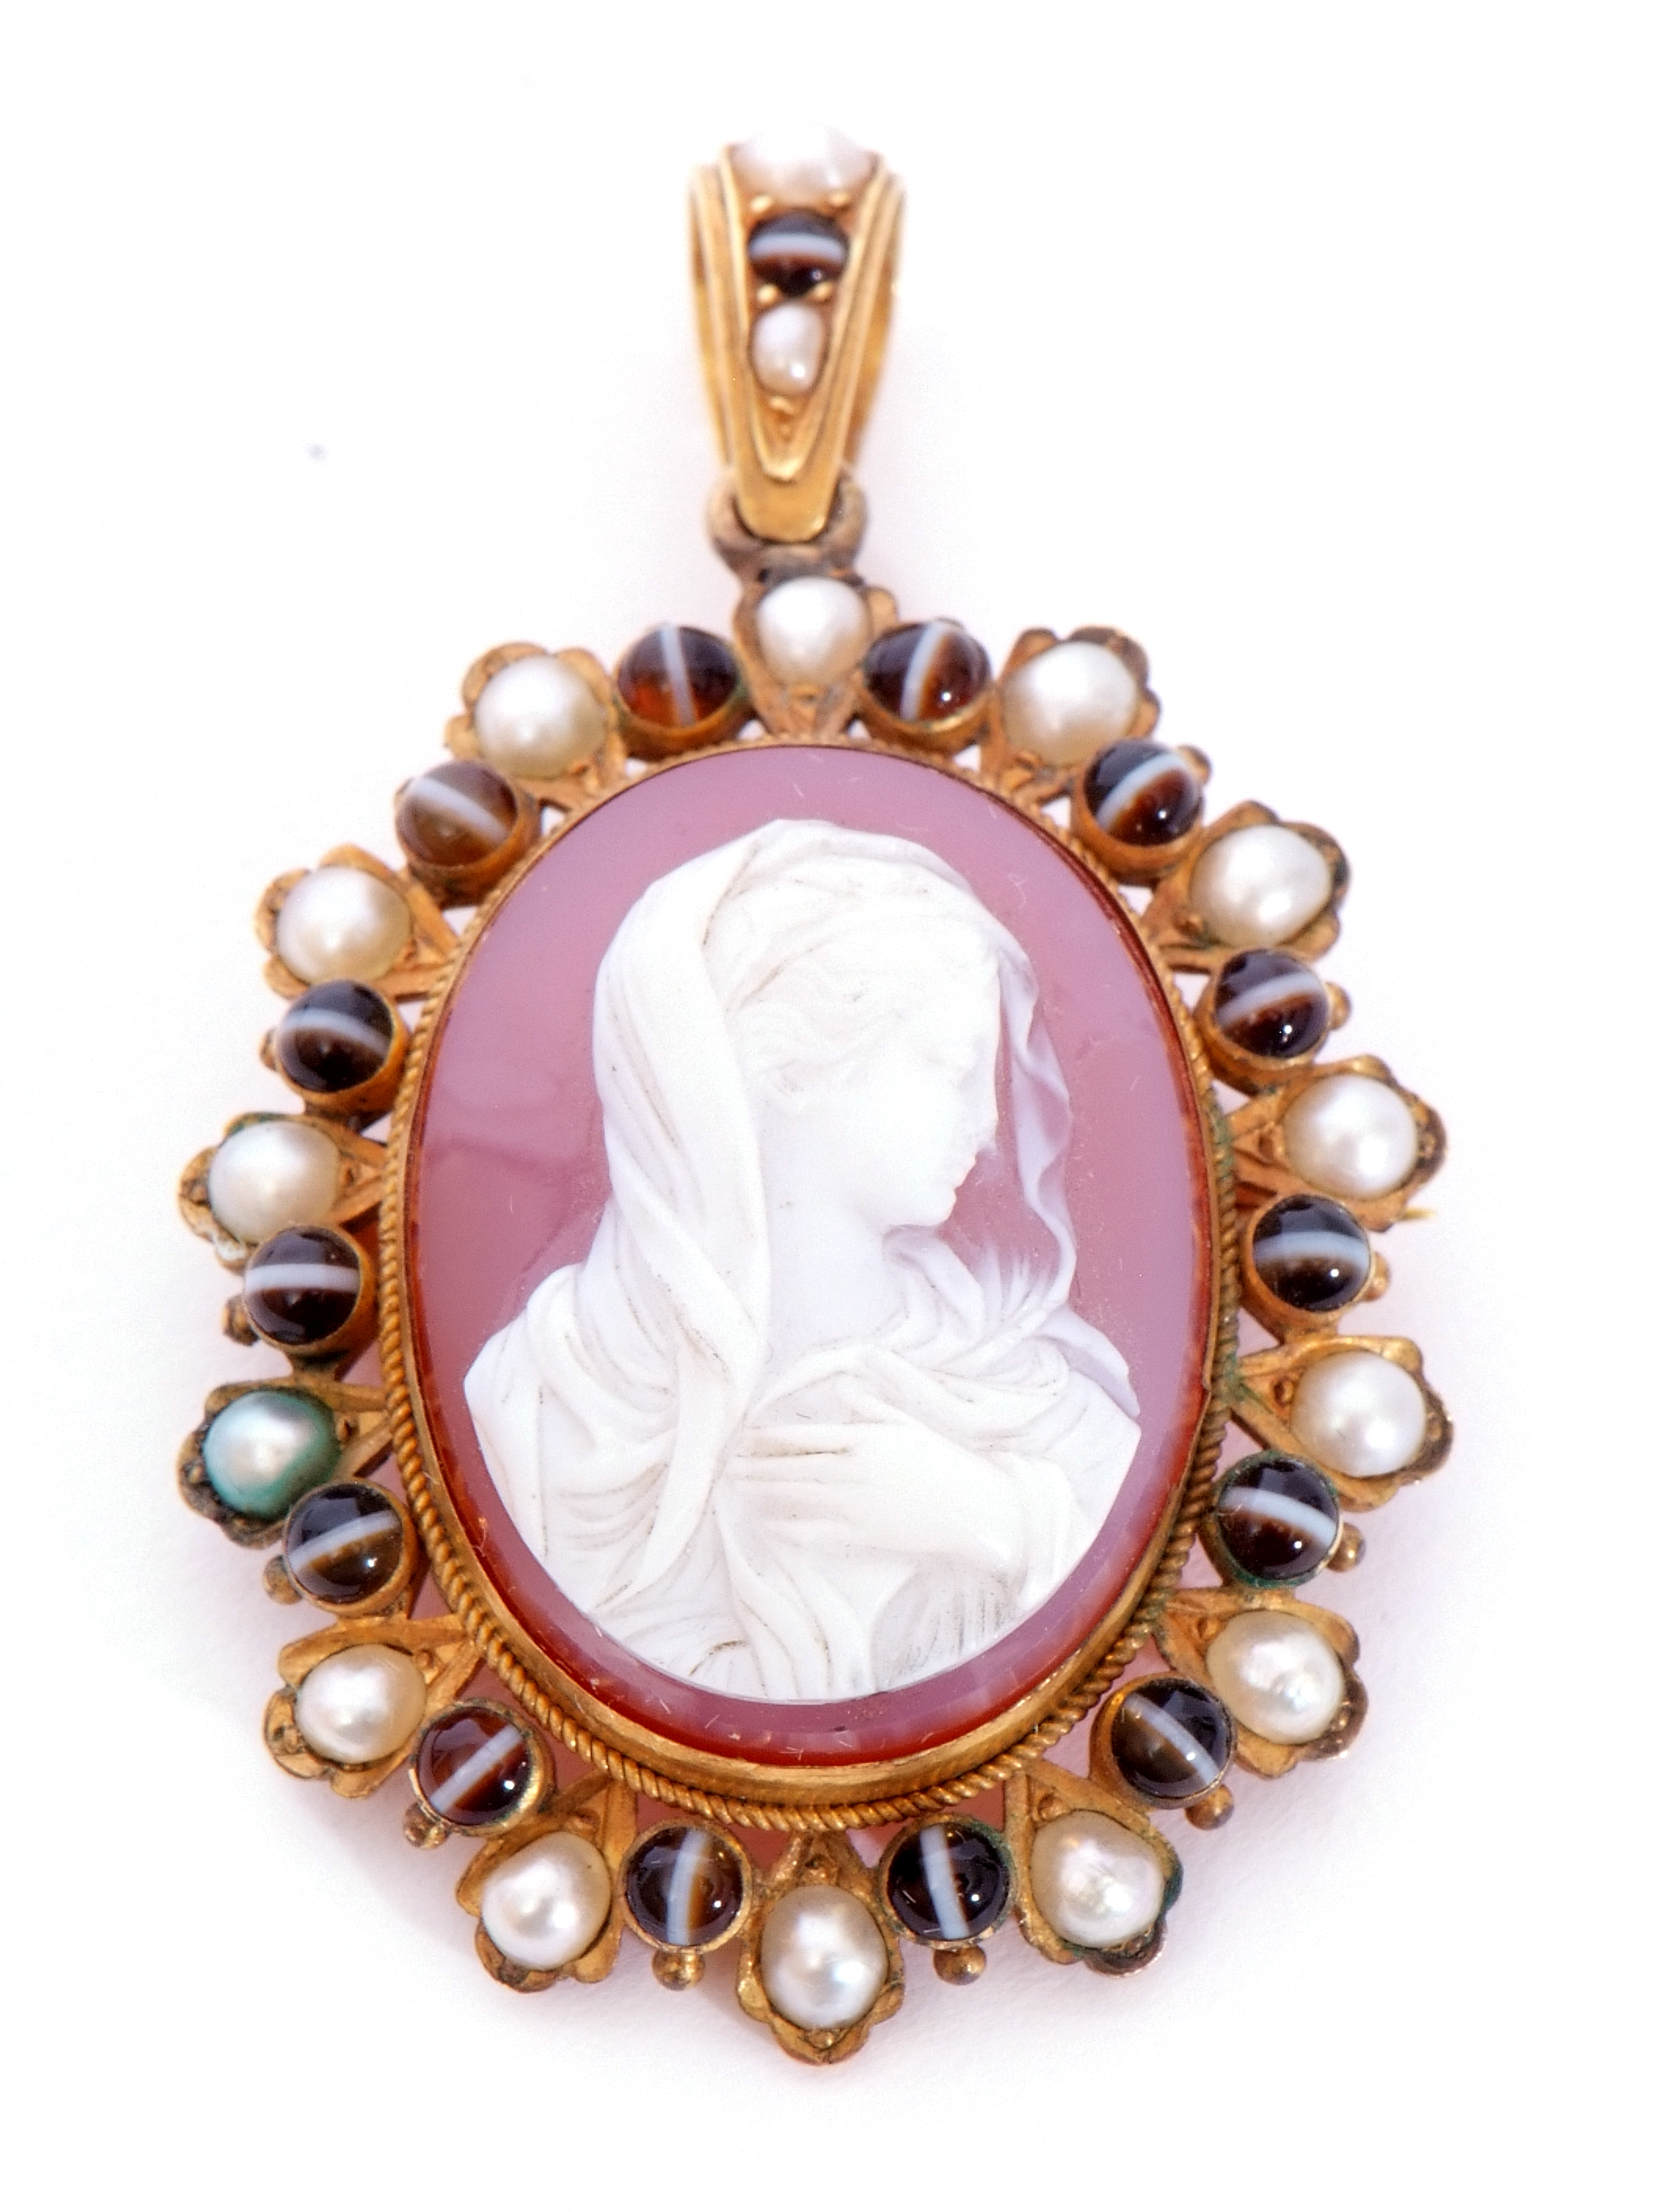 Victorian hardstone cameo pendant depicting a veiled lady carved in high relief, 25 x 20mm in a